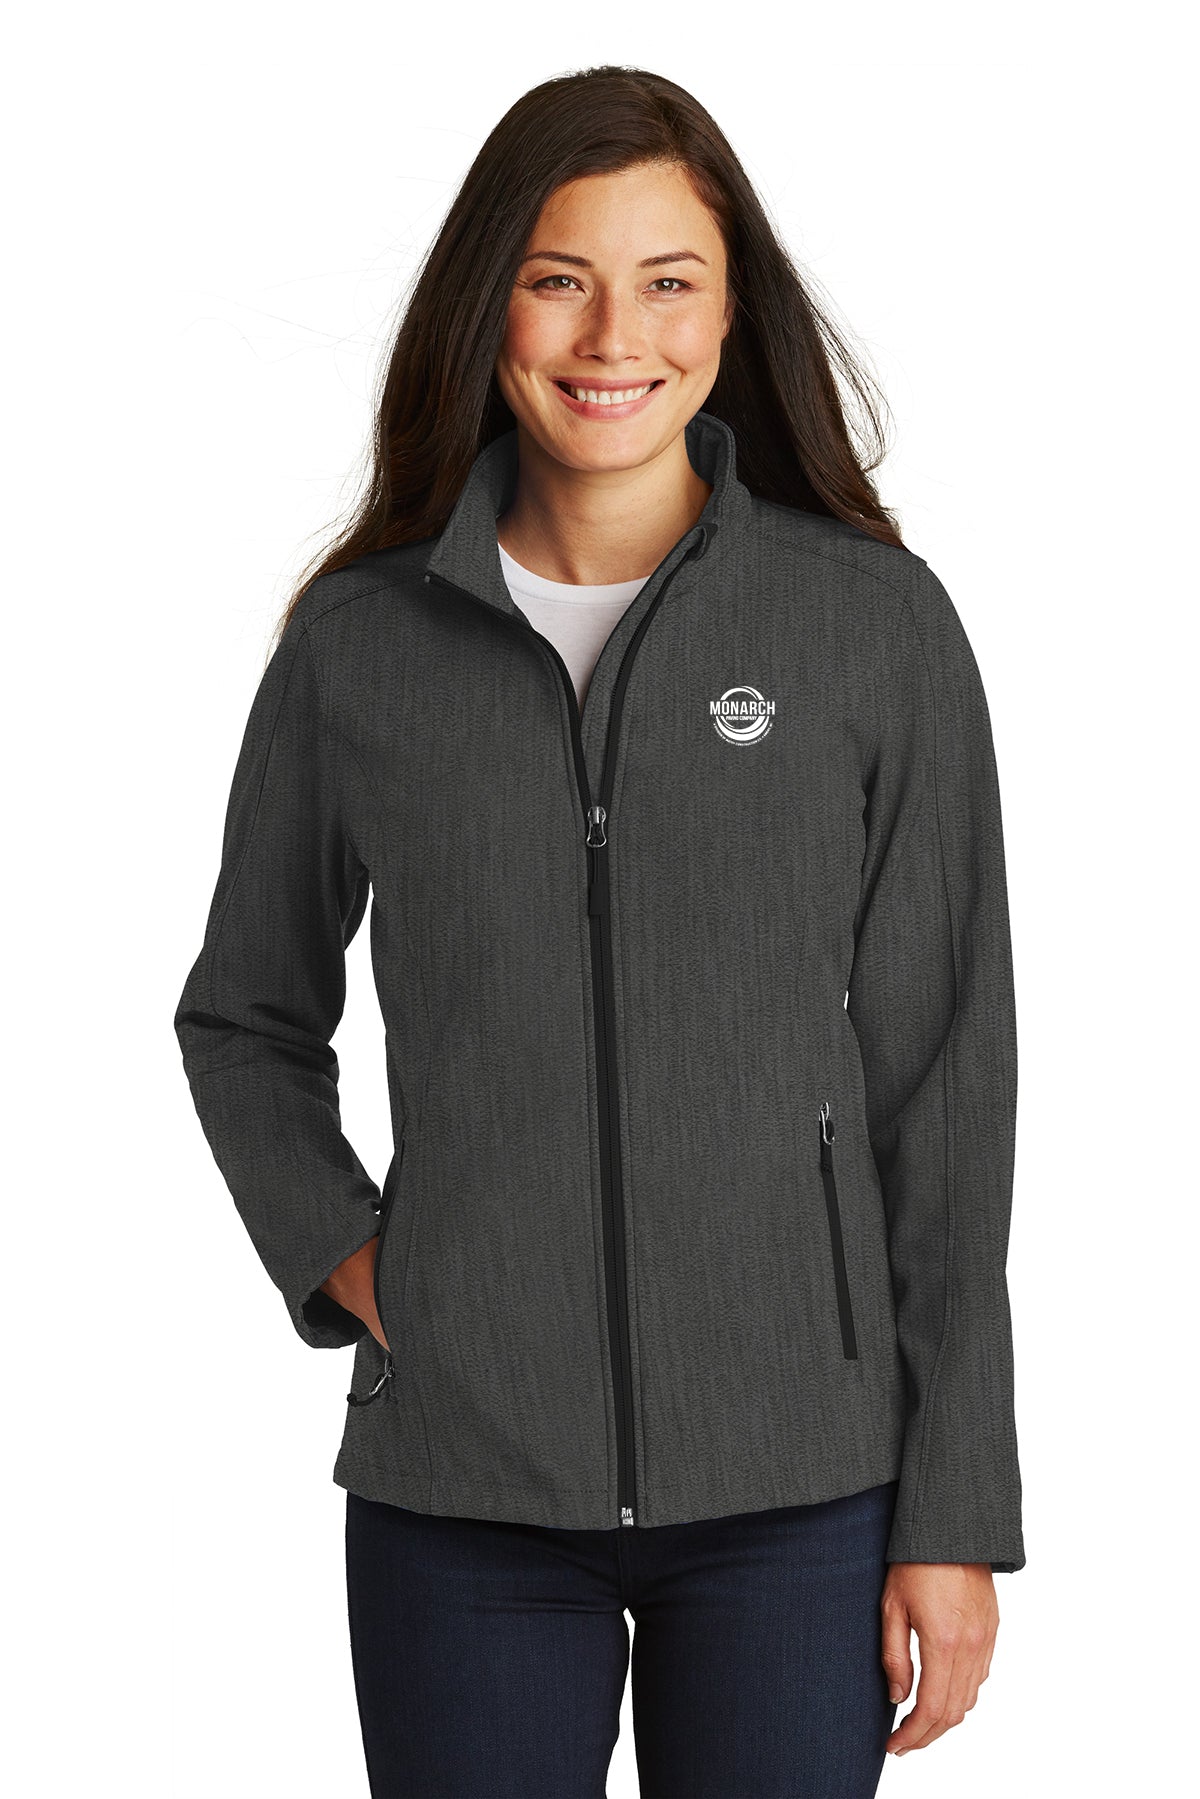 Monarch Construction Ladies Soft Shell Jacket